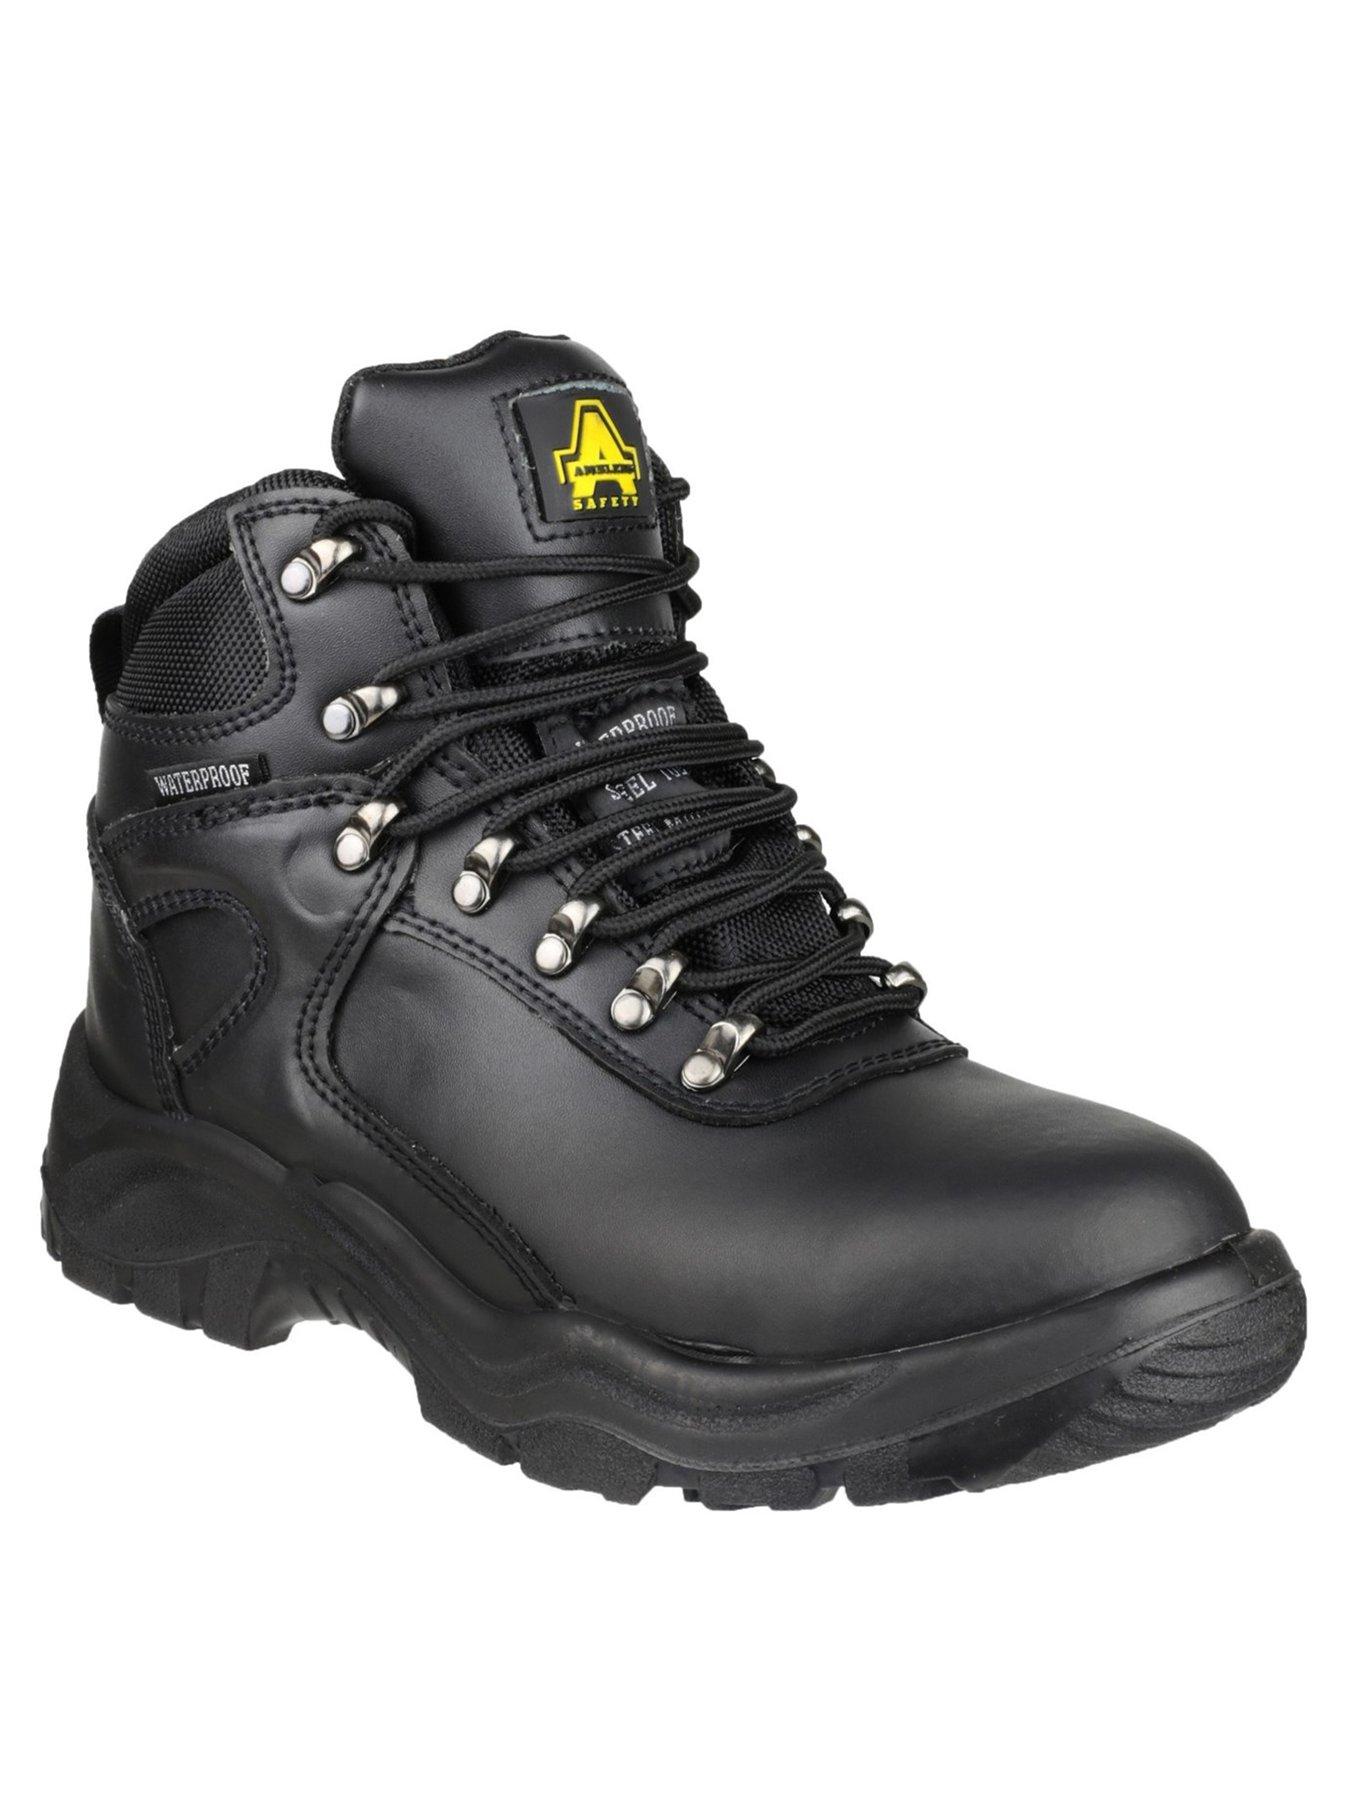 ET Safety Black Honey Navy brown Low back laceup Leather Steel Toecap Work Boots 